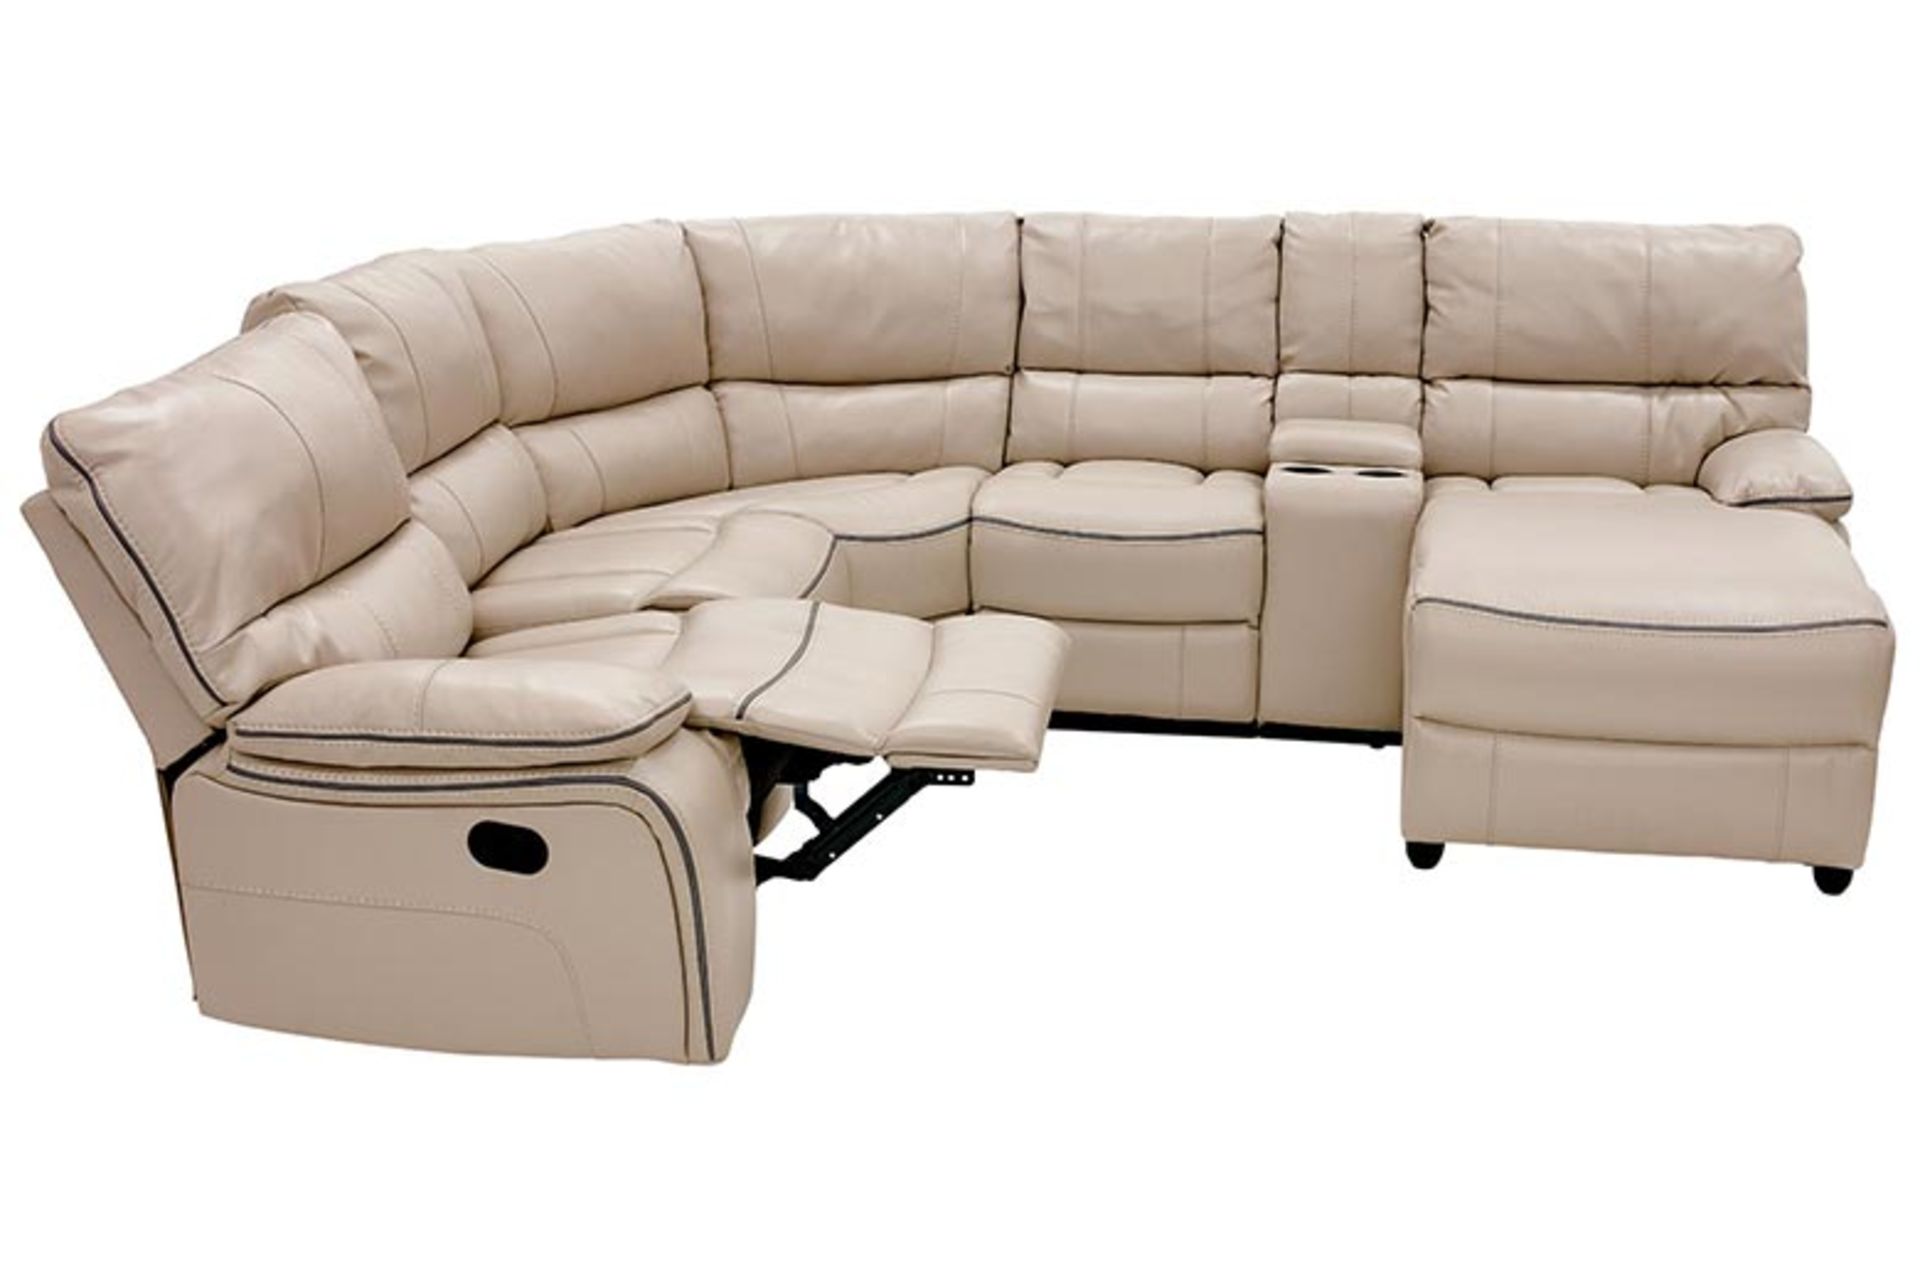 Vermont cream leather air reclining corner sofa plus console with drinks holder and chaise